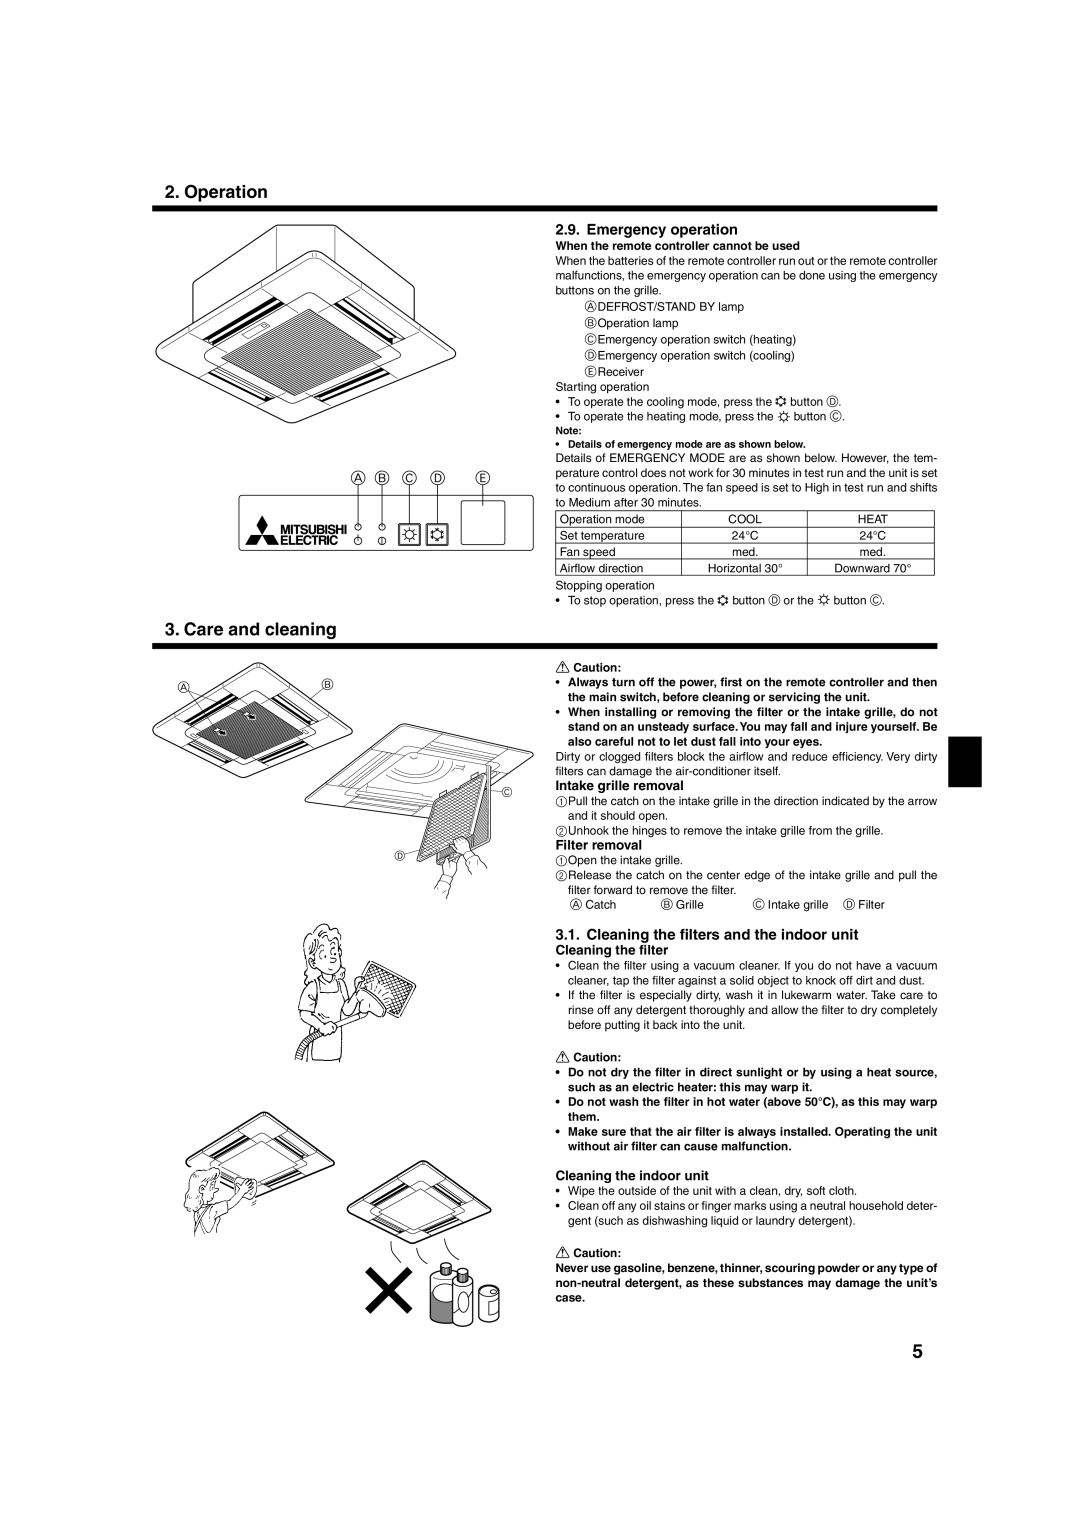 Mitsubishi Electronics A12, SLZ-A09, A18AR operation manual Care and cleaning, Operation, Emergency operation, A B C D E 